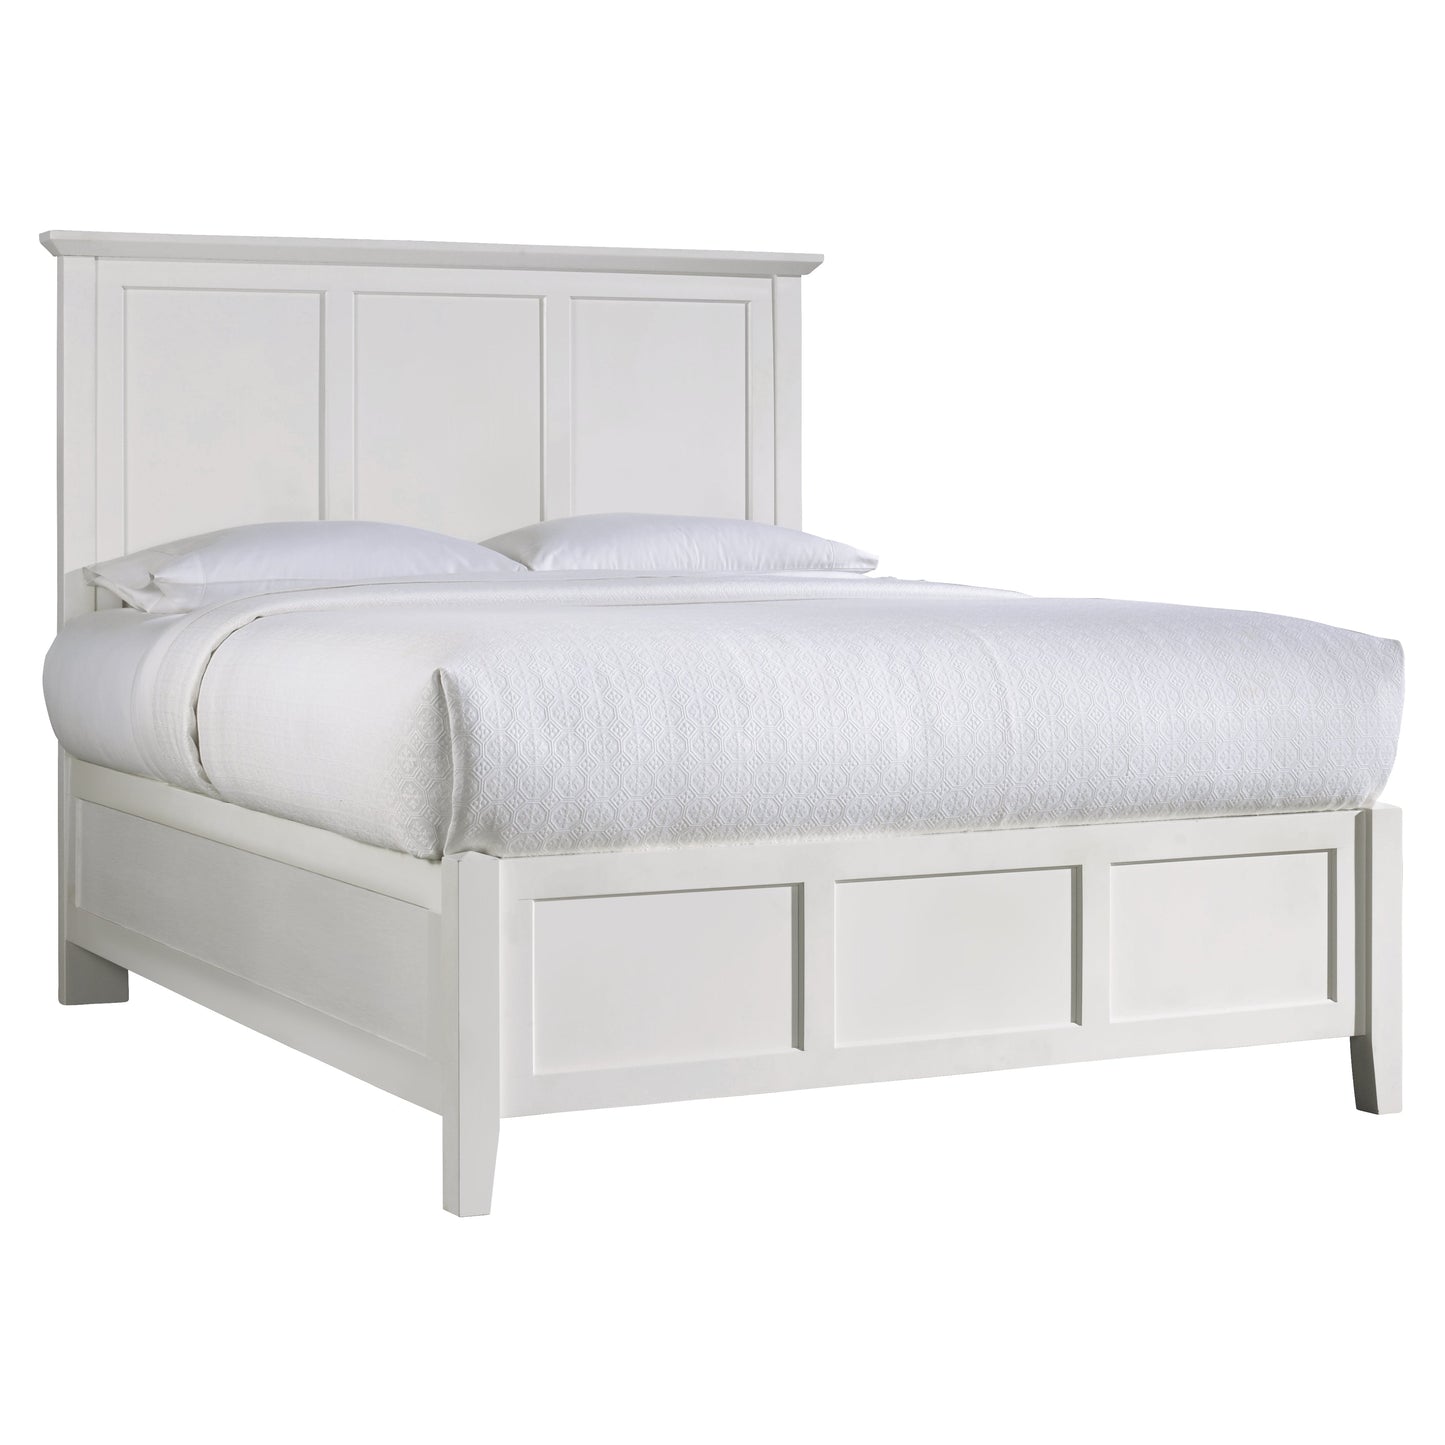 Modus Paragon 5PC Queen Bed Set w 2 Nightstand in White